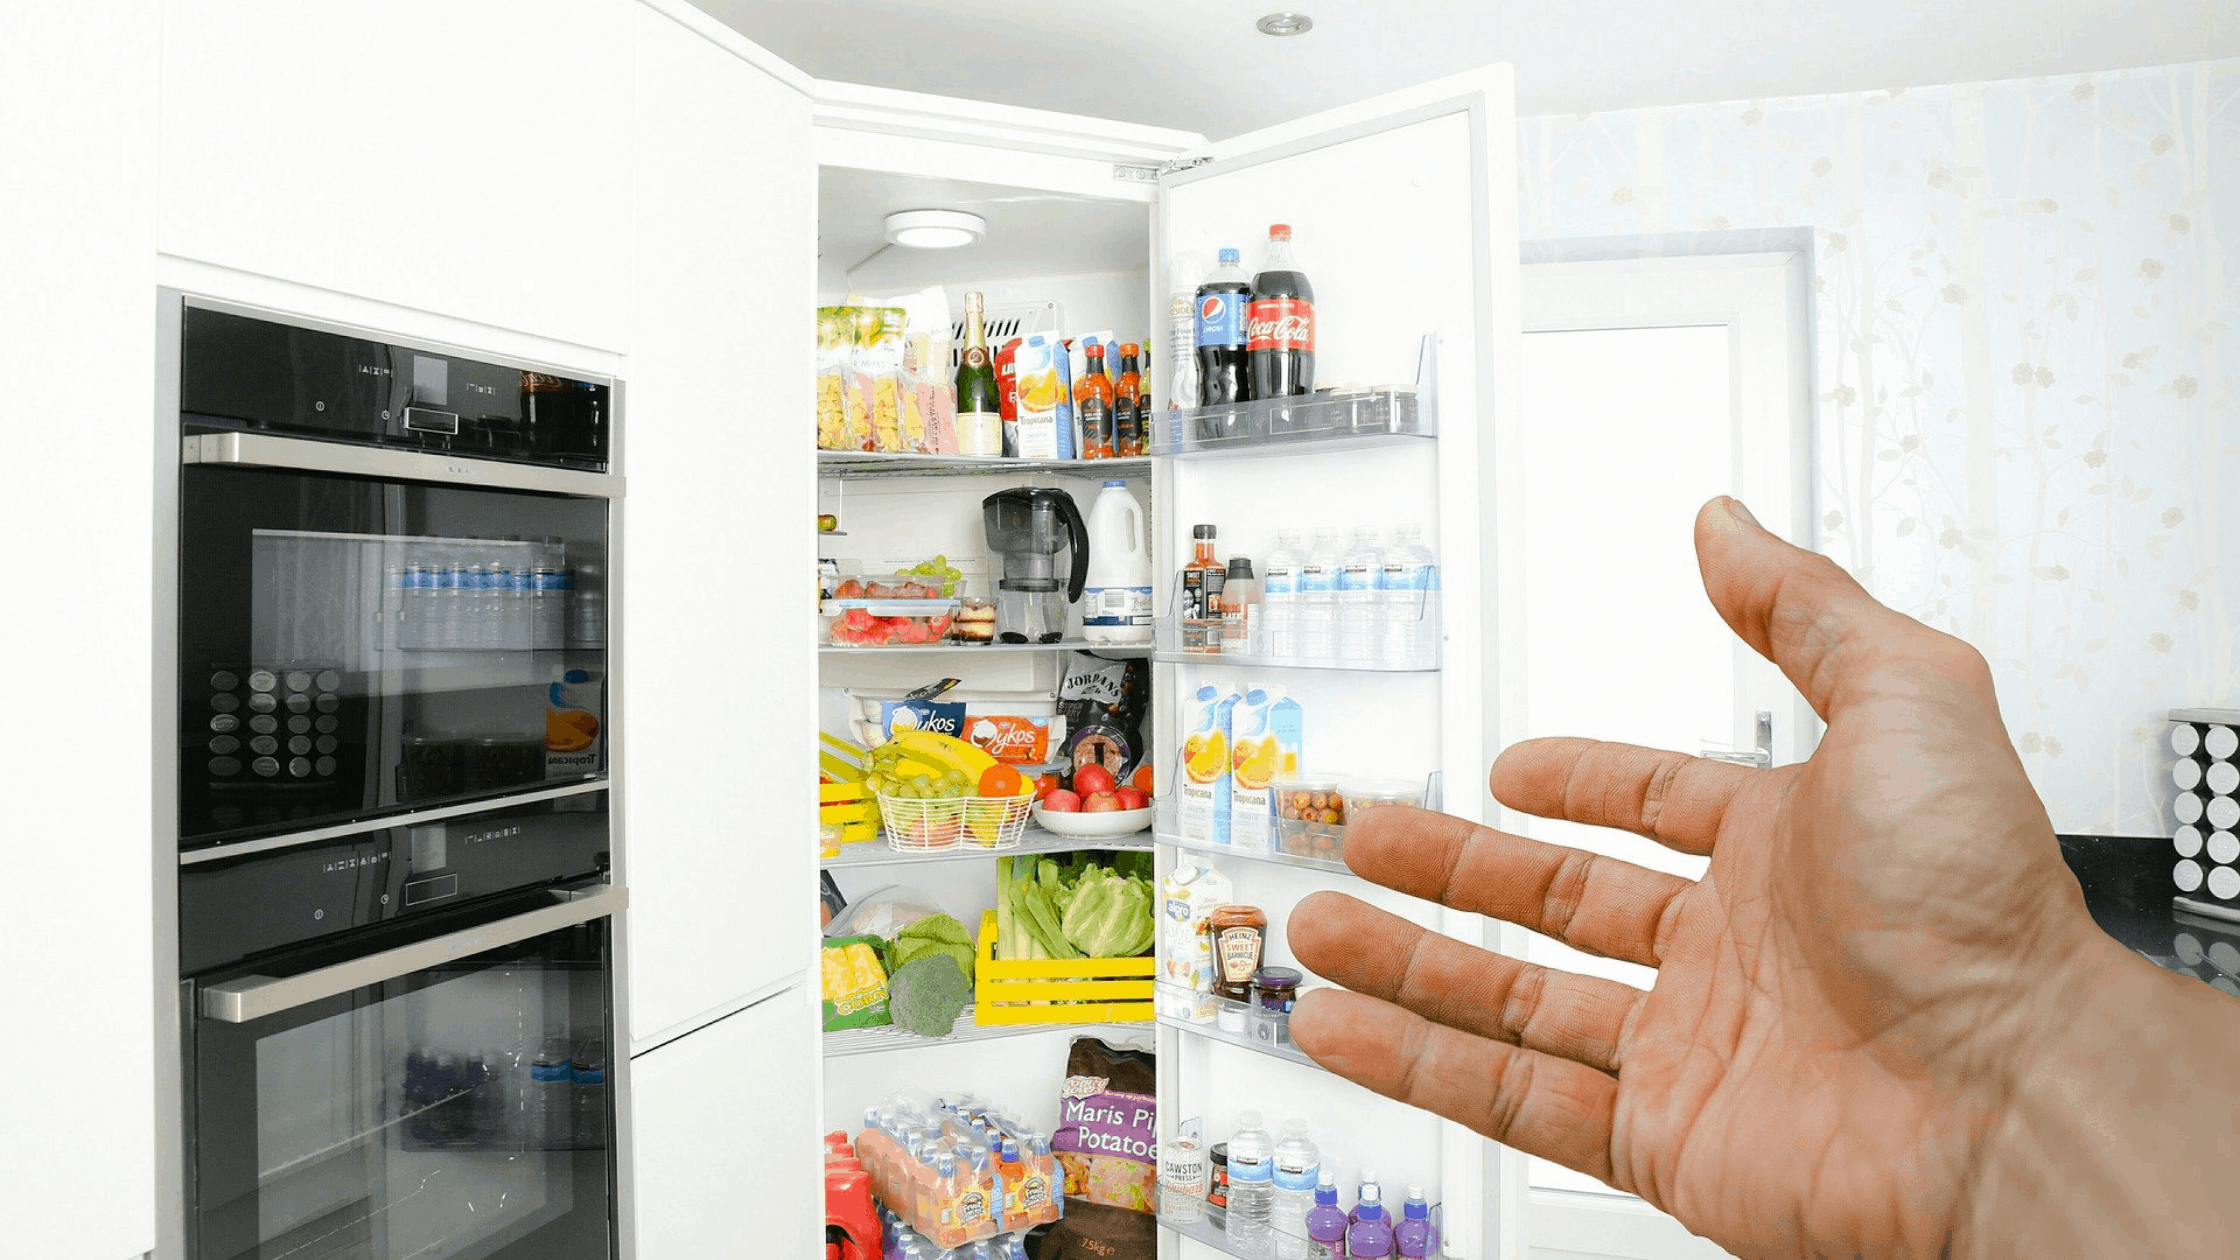 How to quiet a refrigerator noise